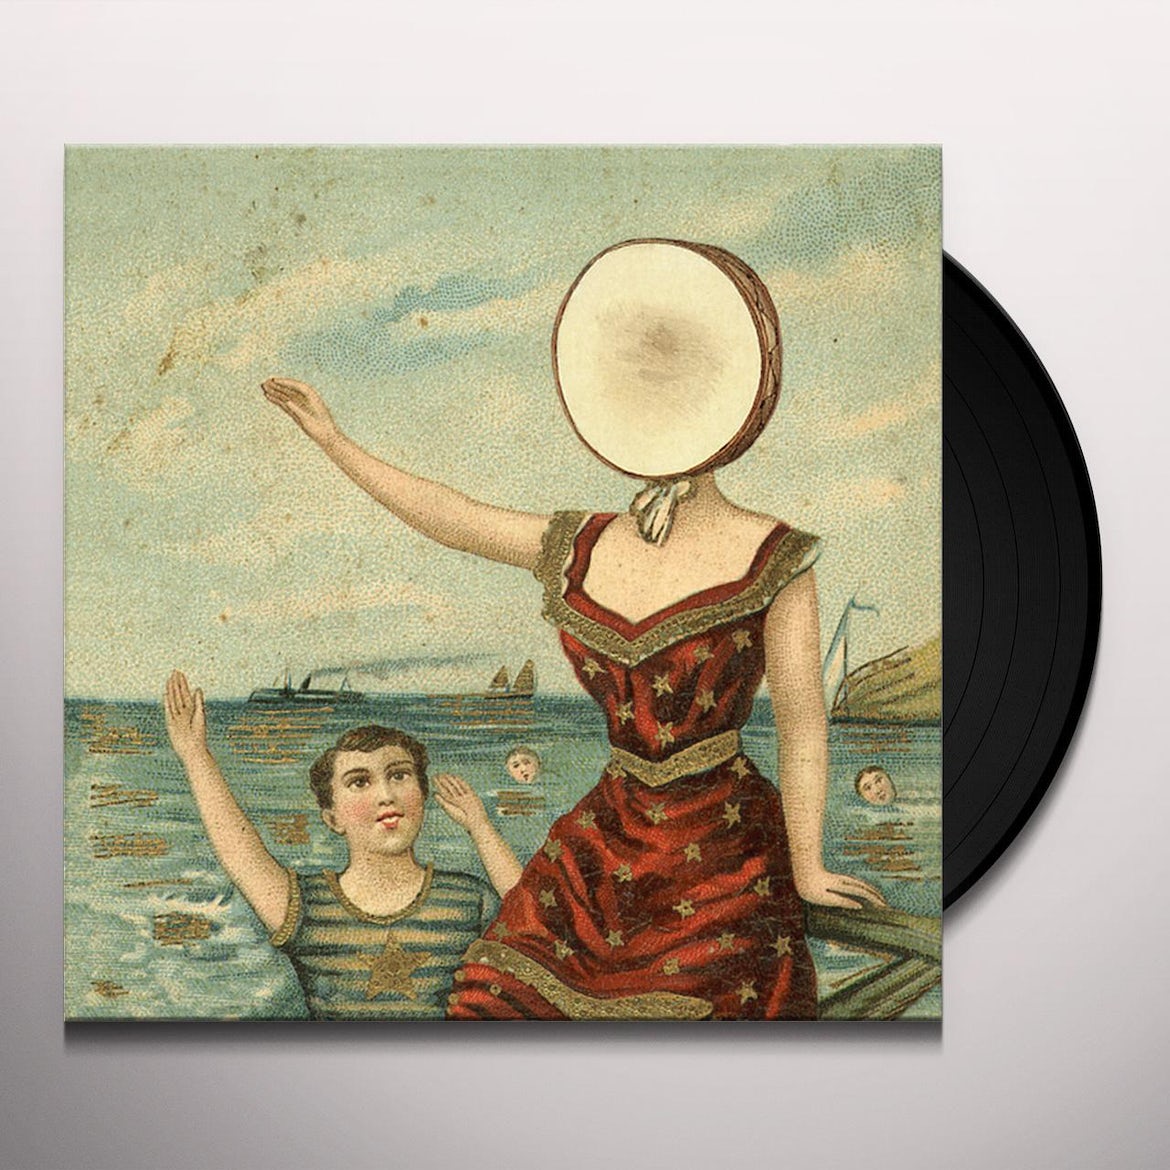 Neutral Milk Hotel: In the Aeroplane Over the Sea: LP - Steadfast Records